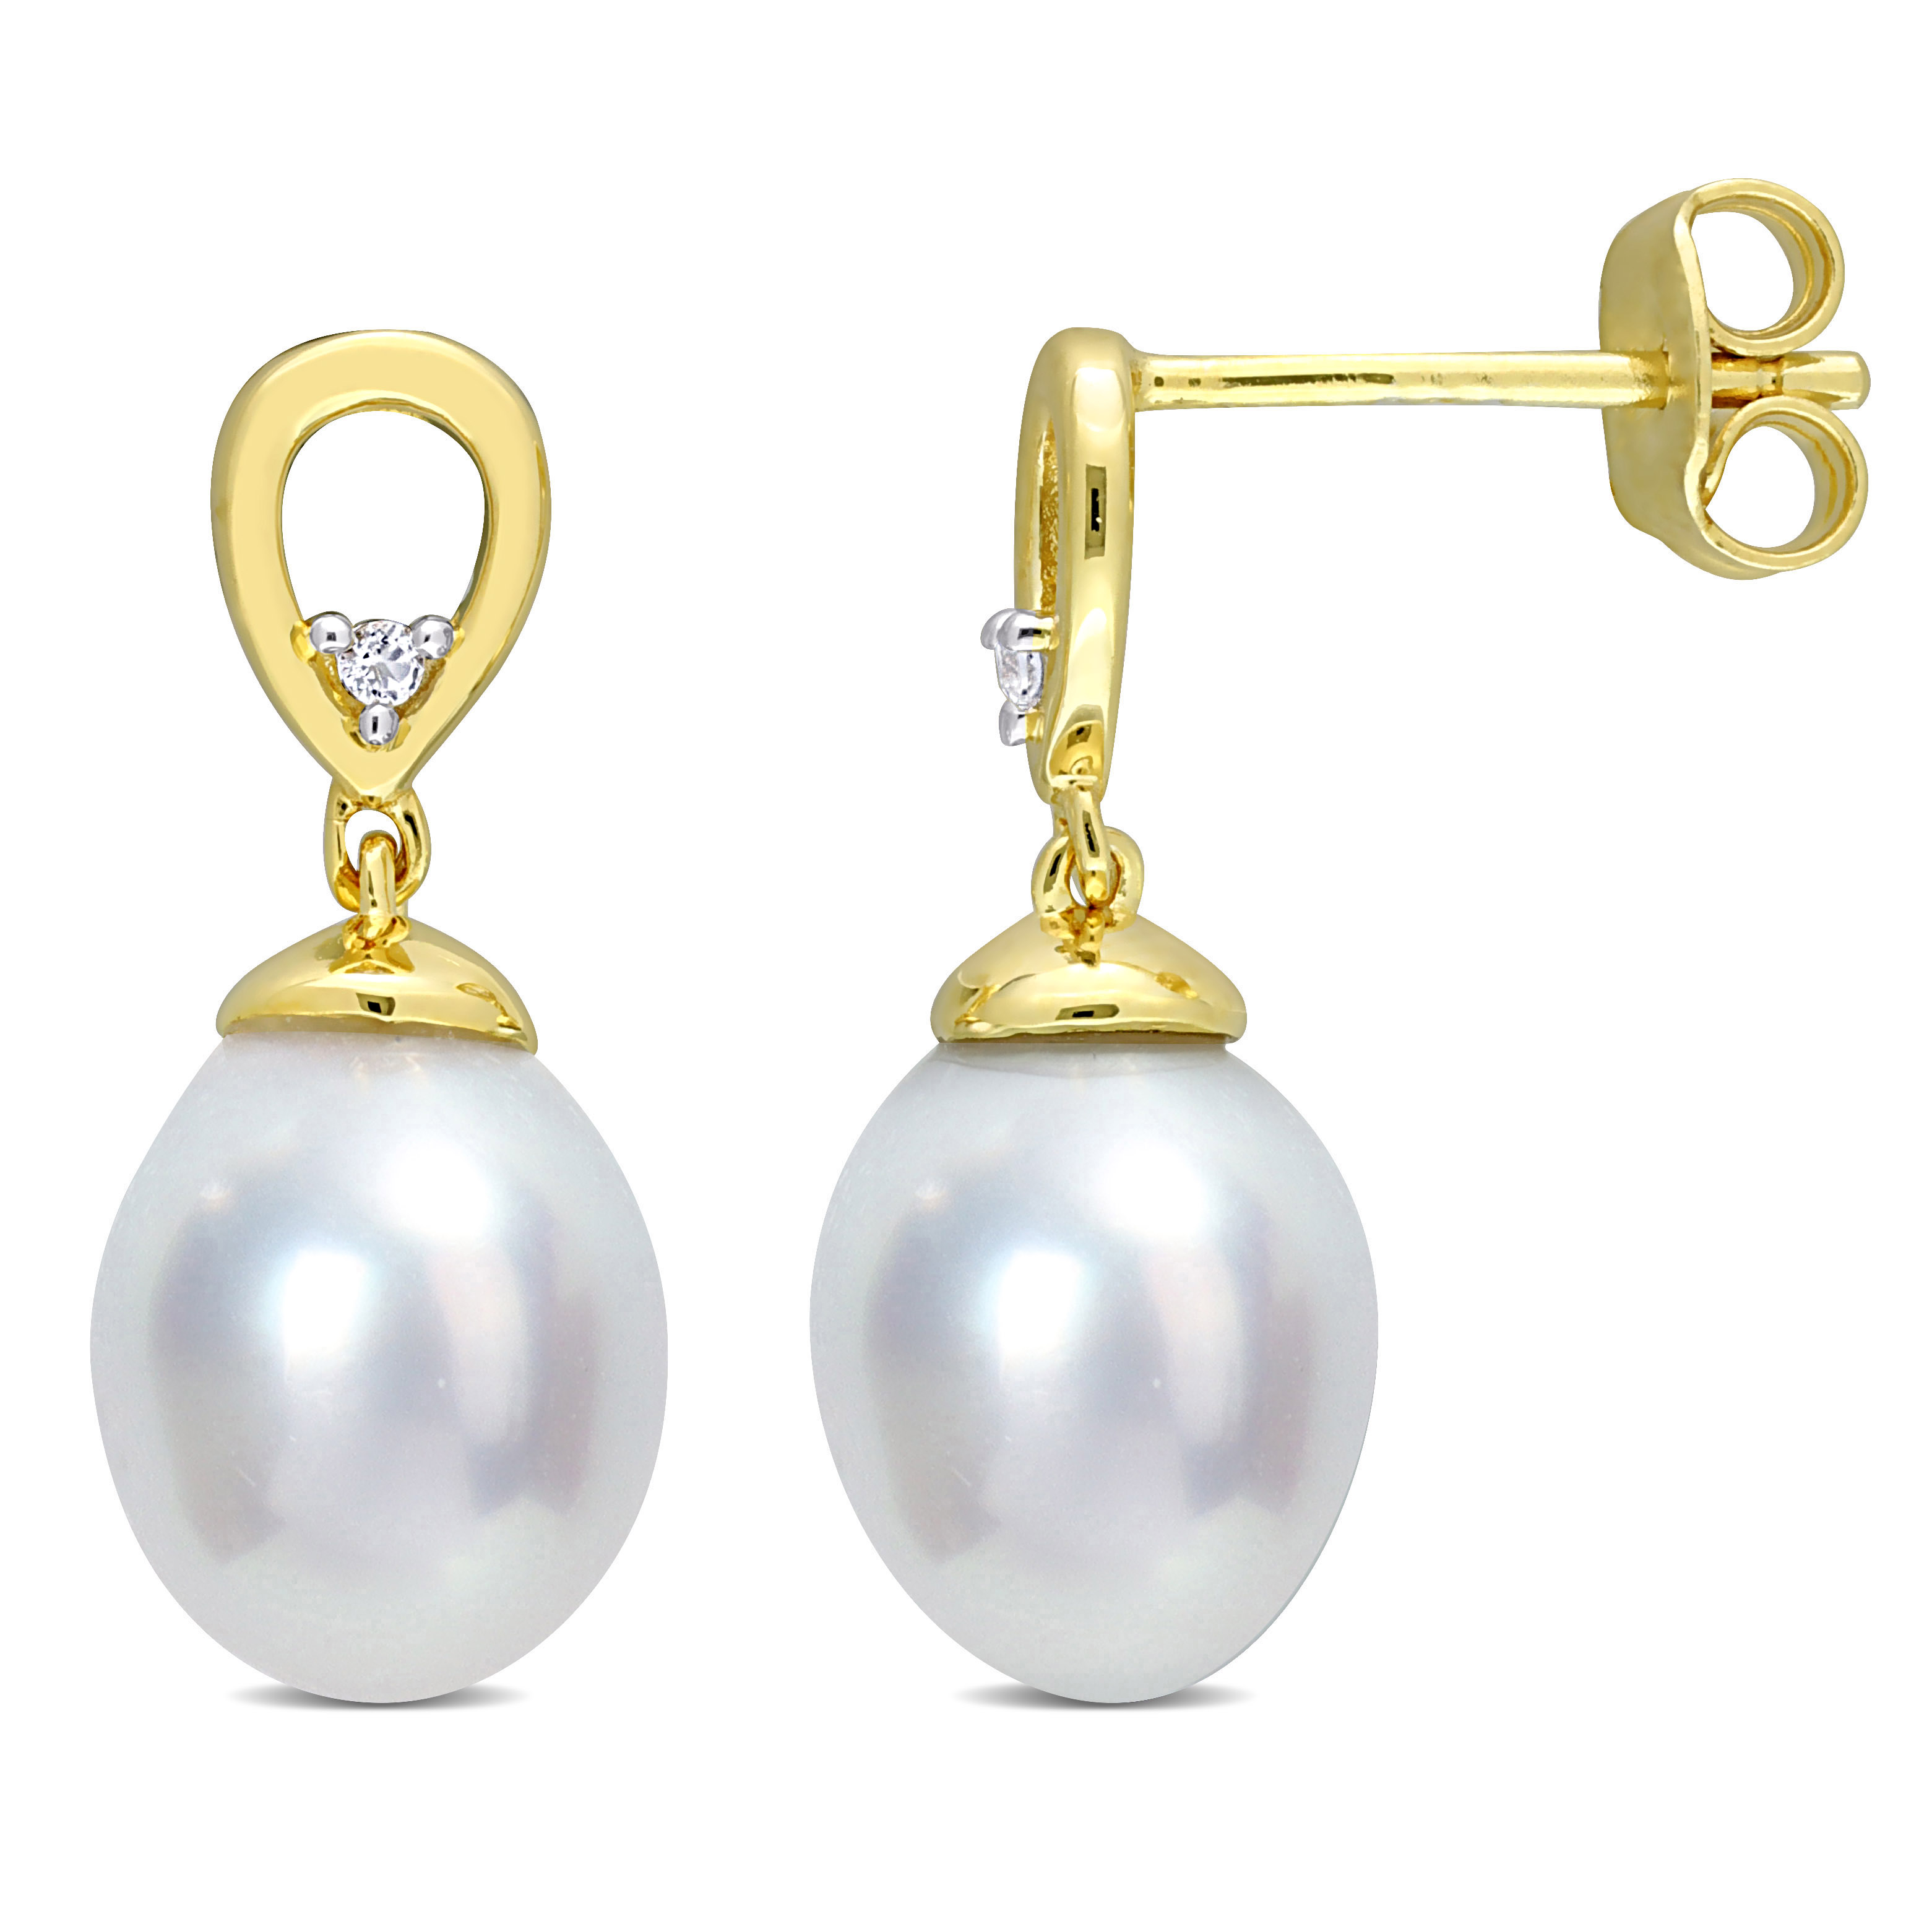 8-9 MM South Sea Cultured Pearl and White Topaz Drop Earrings in Yellow Plated Sterling Silver